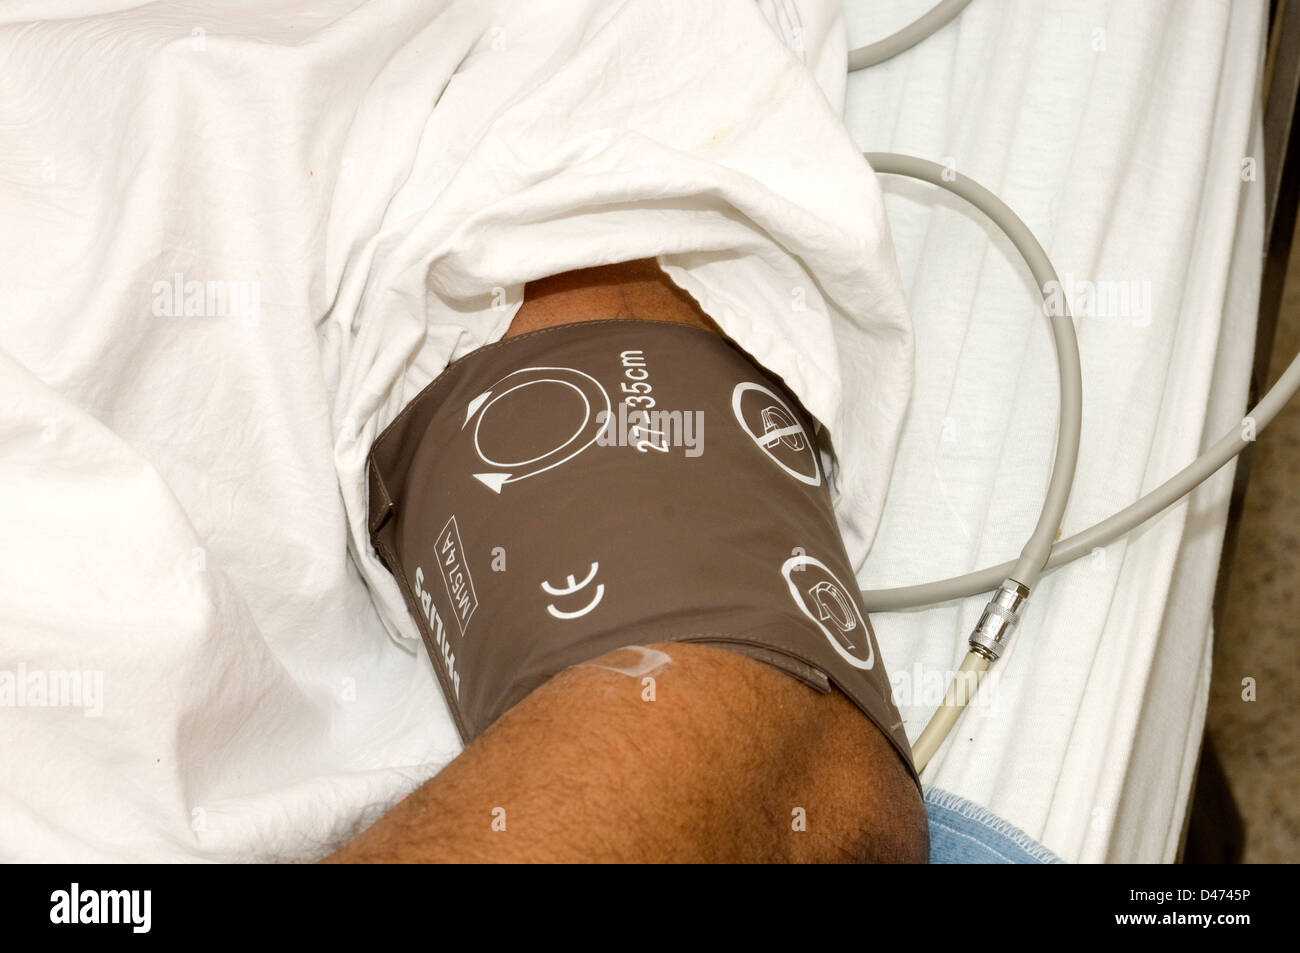 An arm band monitoring device to check a patient's blood pressure. Stock Photo